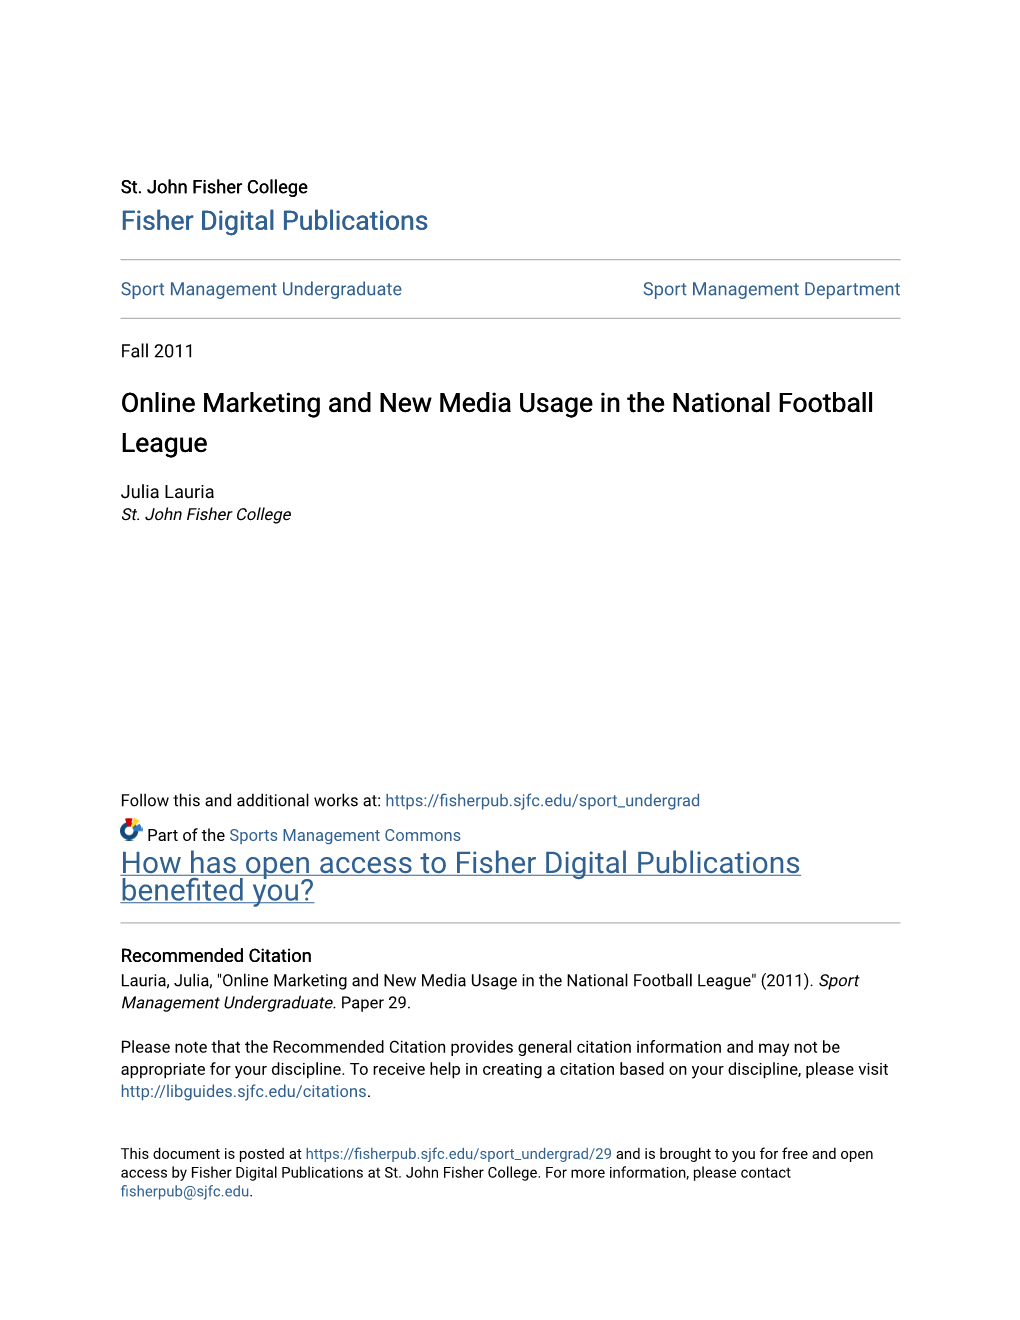 Online Marketing and New Media Usage in the National Football League